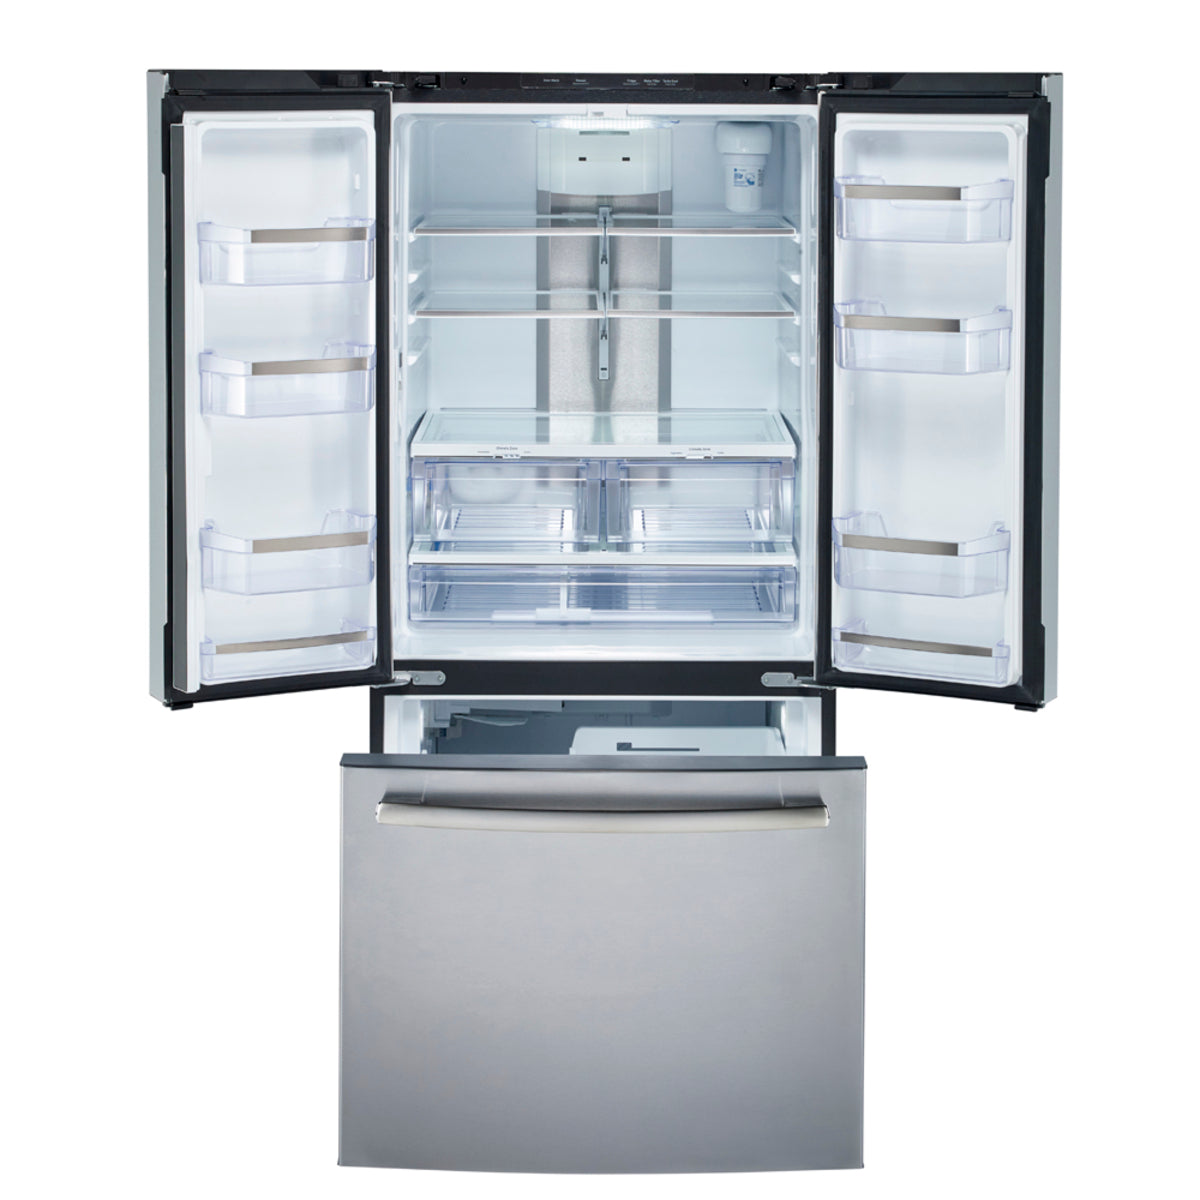 GE Profile - 29.75 Inch 20.8 cu. ft French Door Refrigerator in Stainless - PNE21NYRKFS